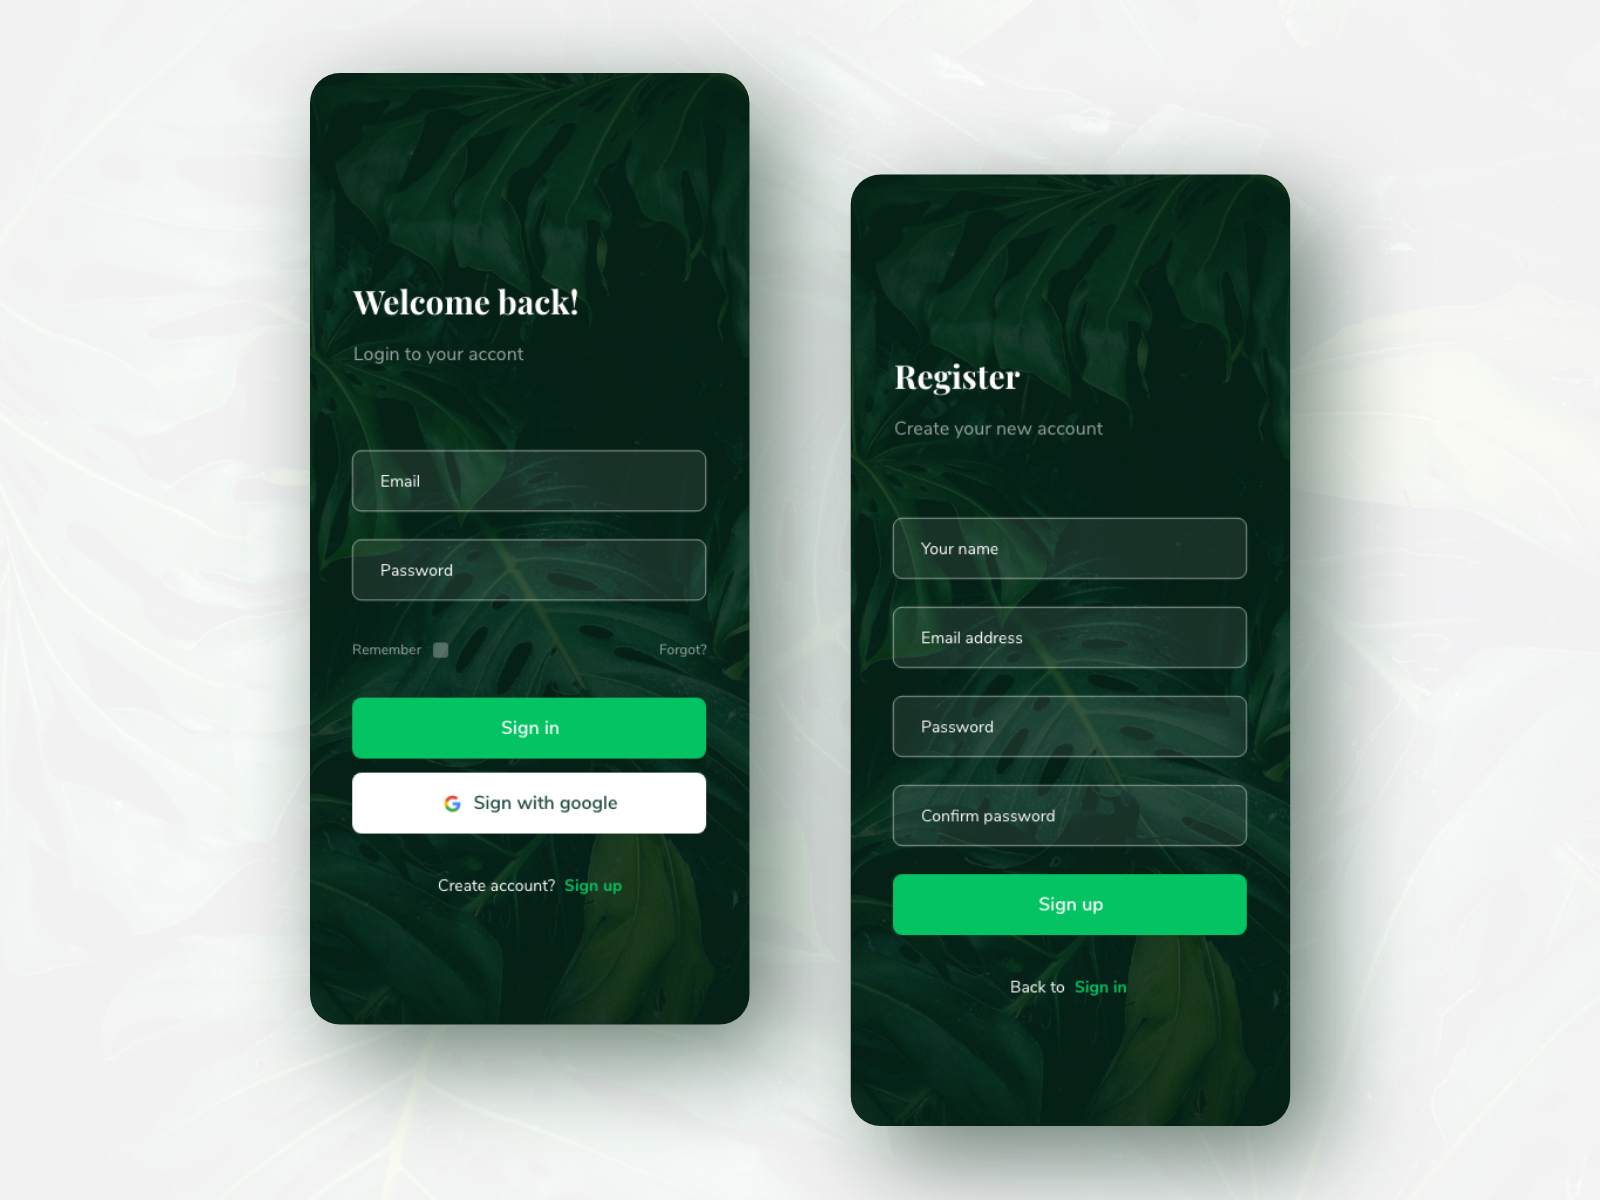 Login - Signup screen app design concept v3 by Saiful Bahri on Dribbble